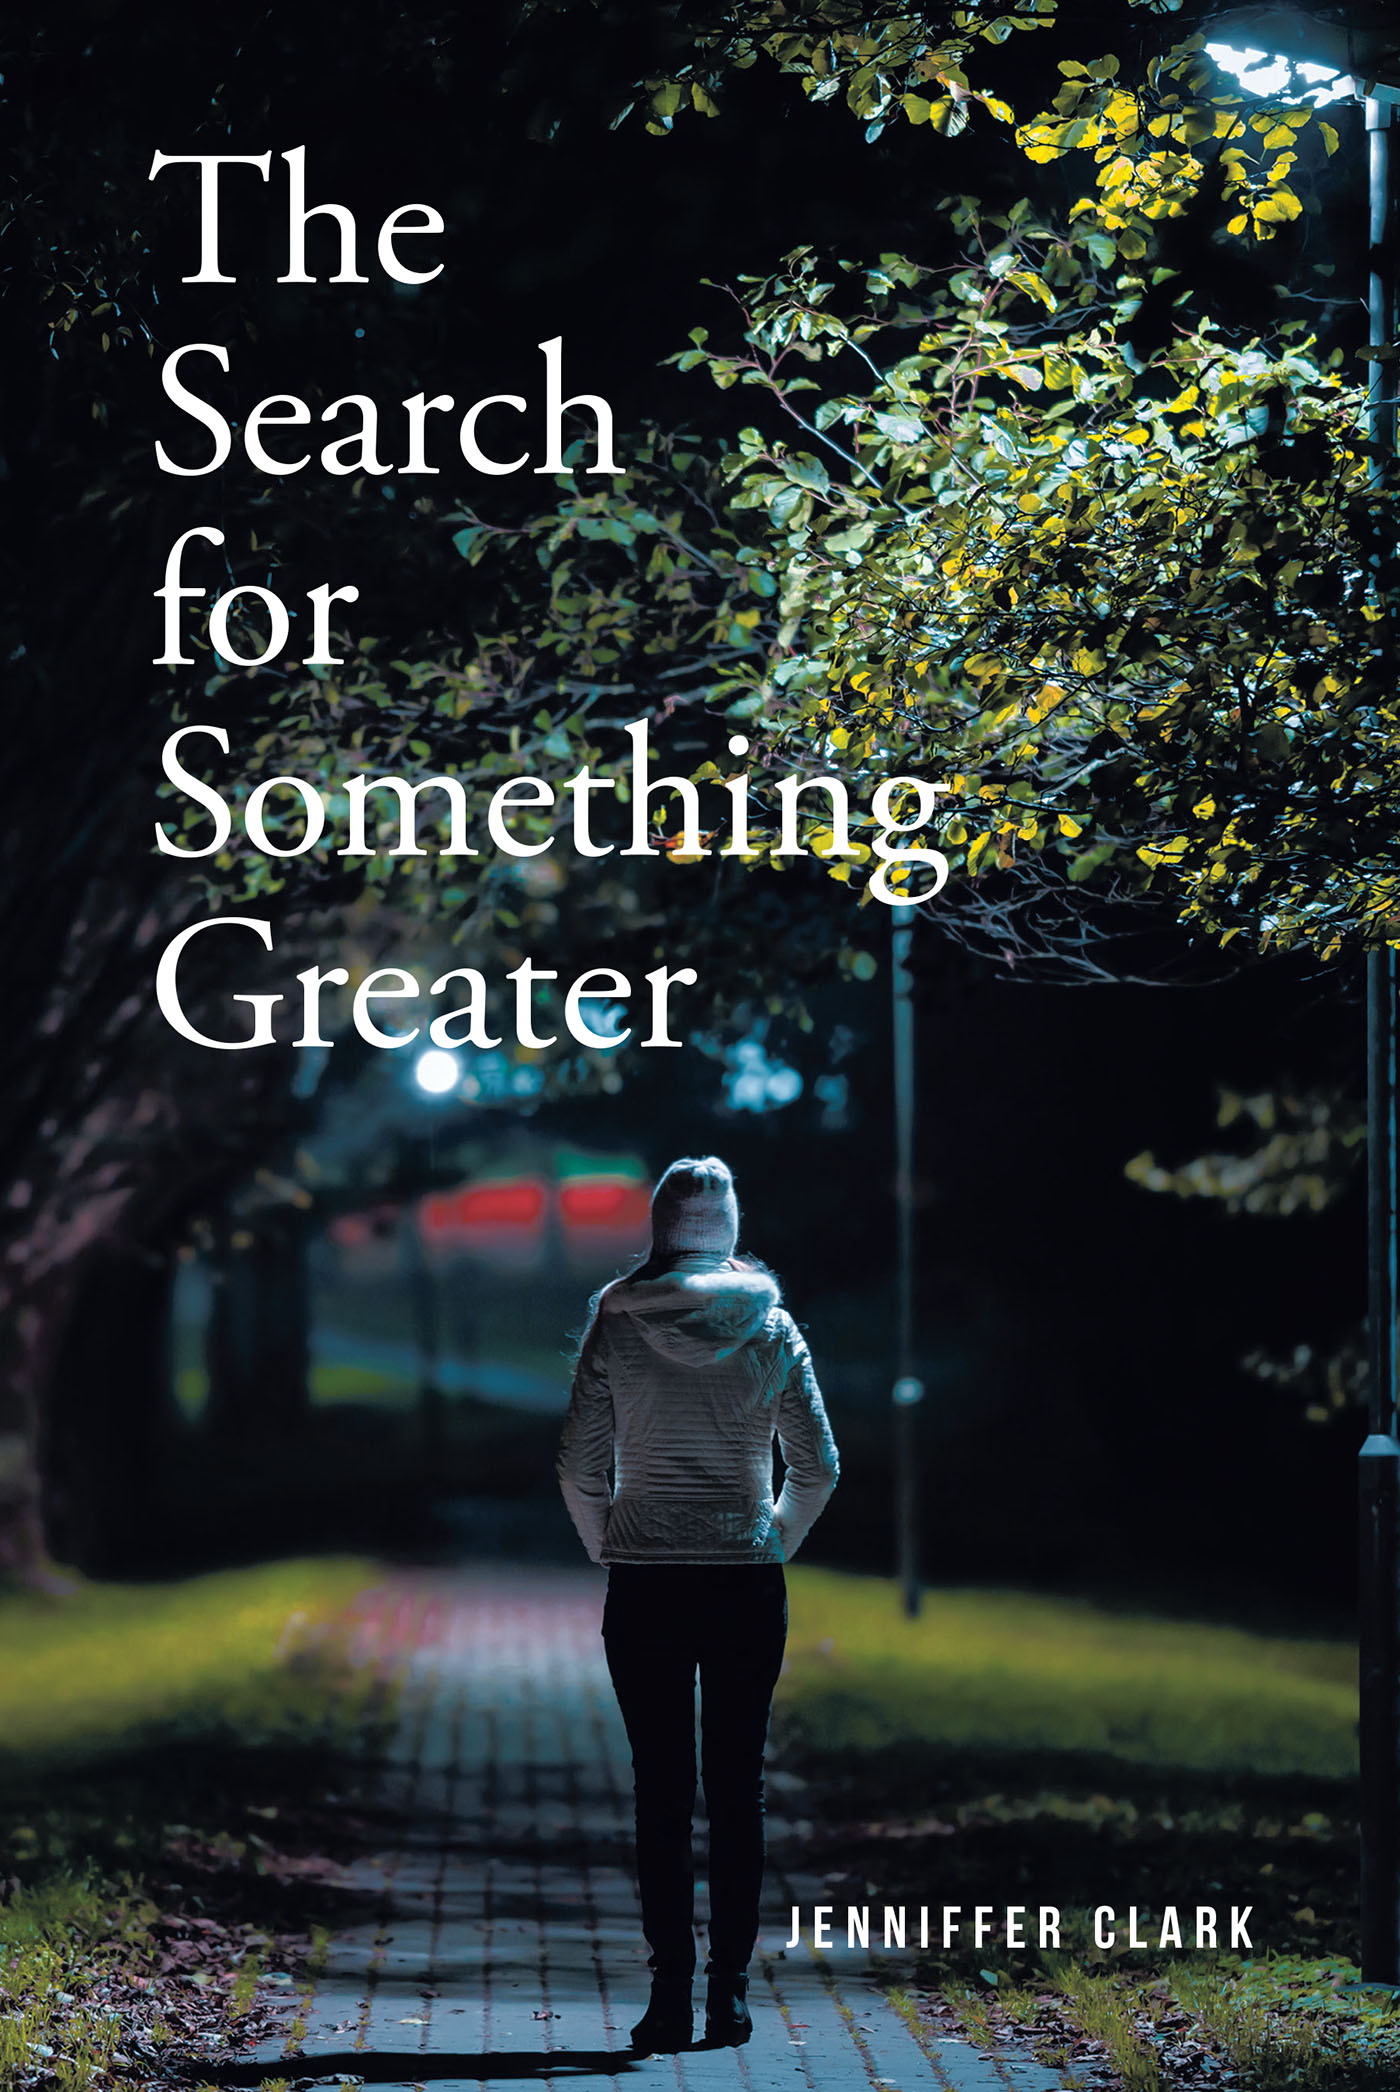 Jenniffer Clark’s New Book, "The Search for Something Greater," is a Compelling Story That Follows a Young Girl Who Learns to Grow and Evolve from Her Past Traumas